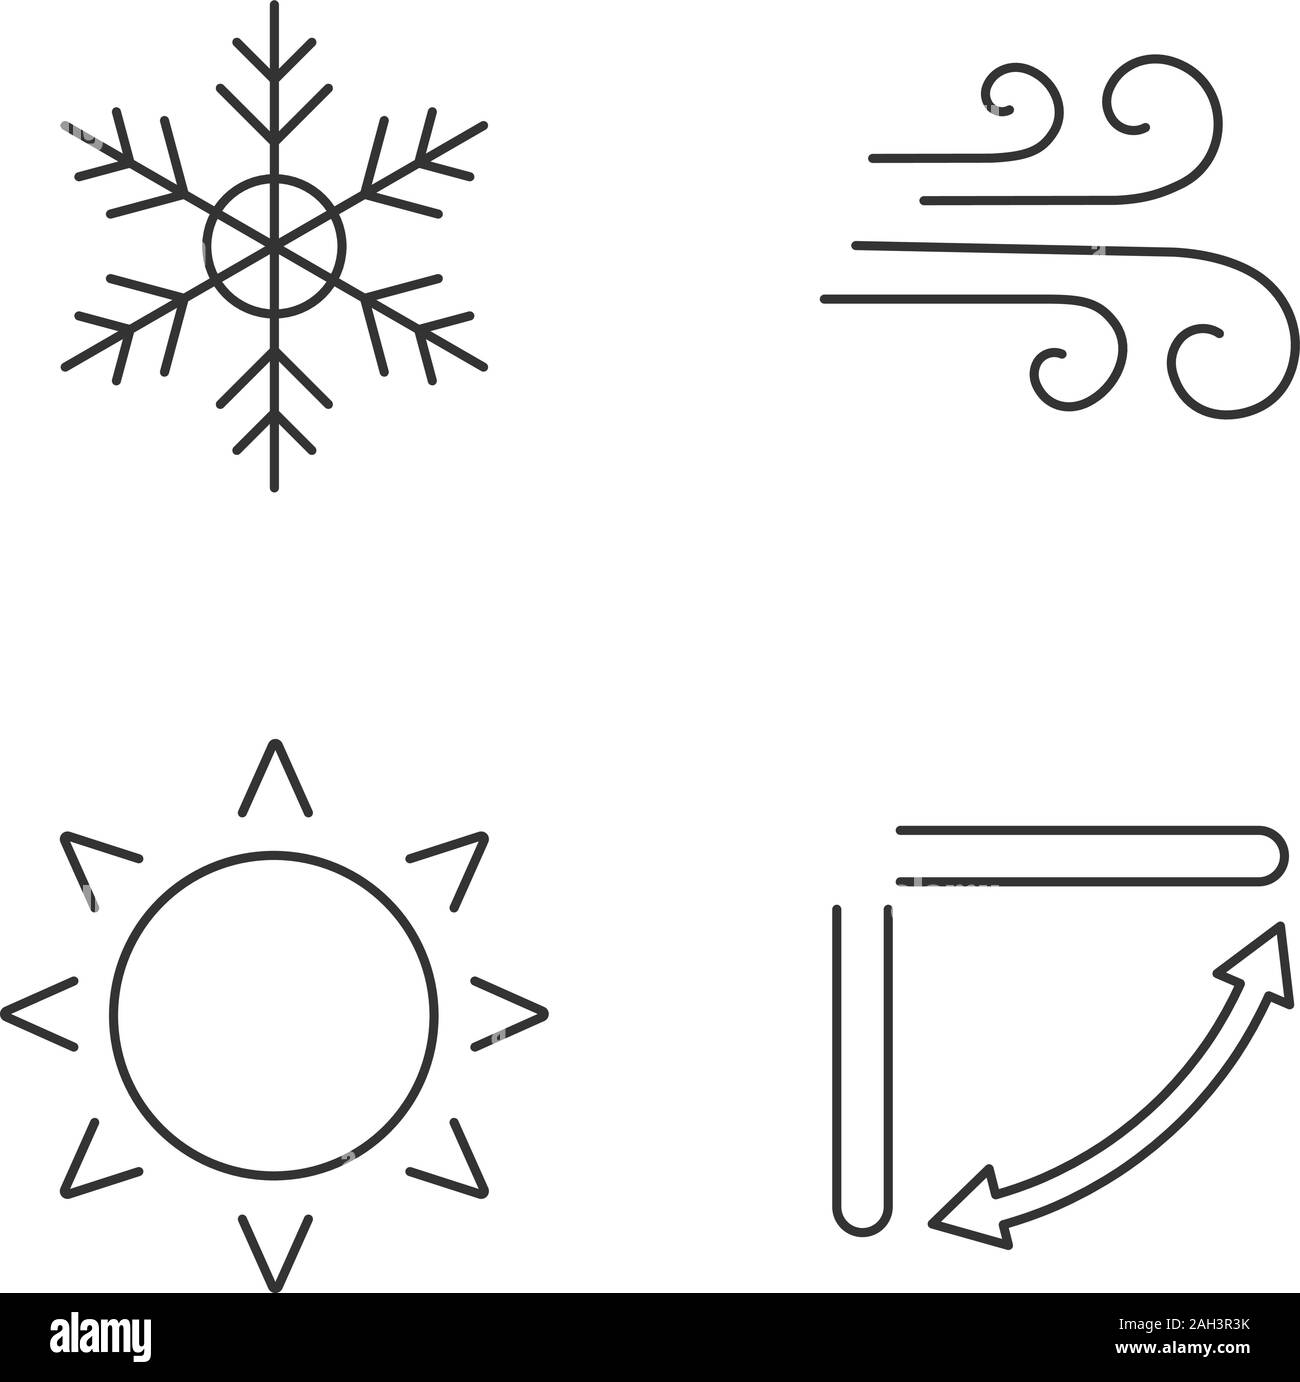 Air conditioning linear icons set. Snowflake, airflow, sun, air conditioner louvers. Thin line contour symbols. Isolated vector outline illustrations. Stock Vector